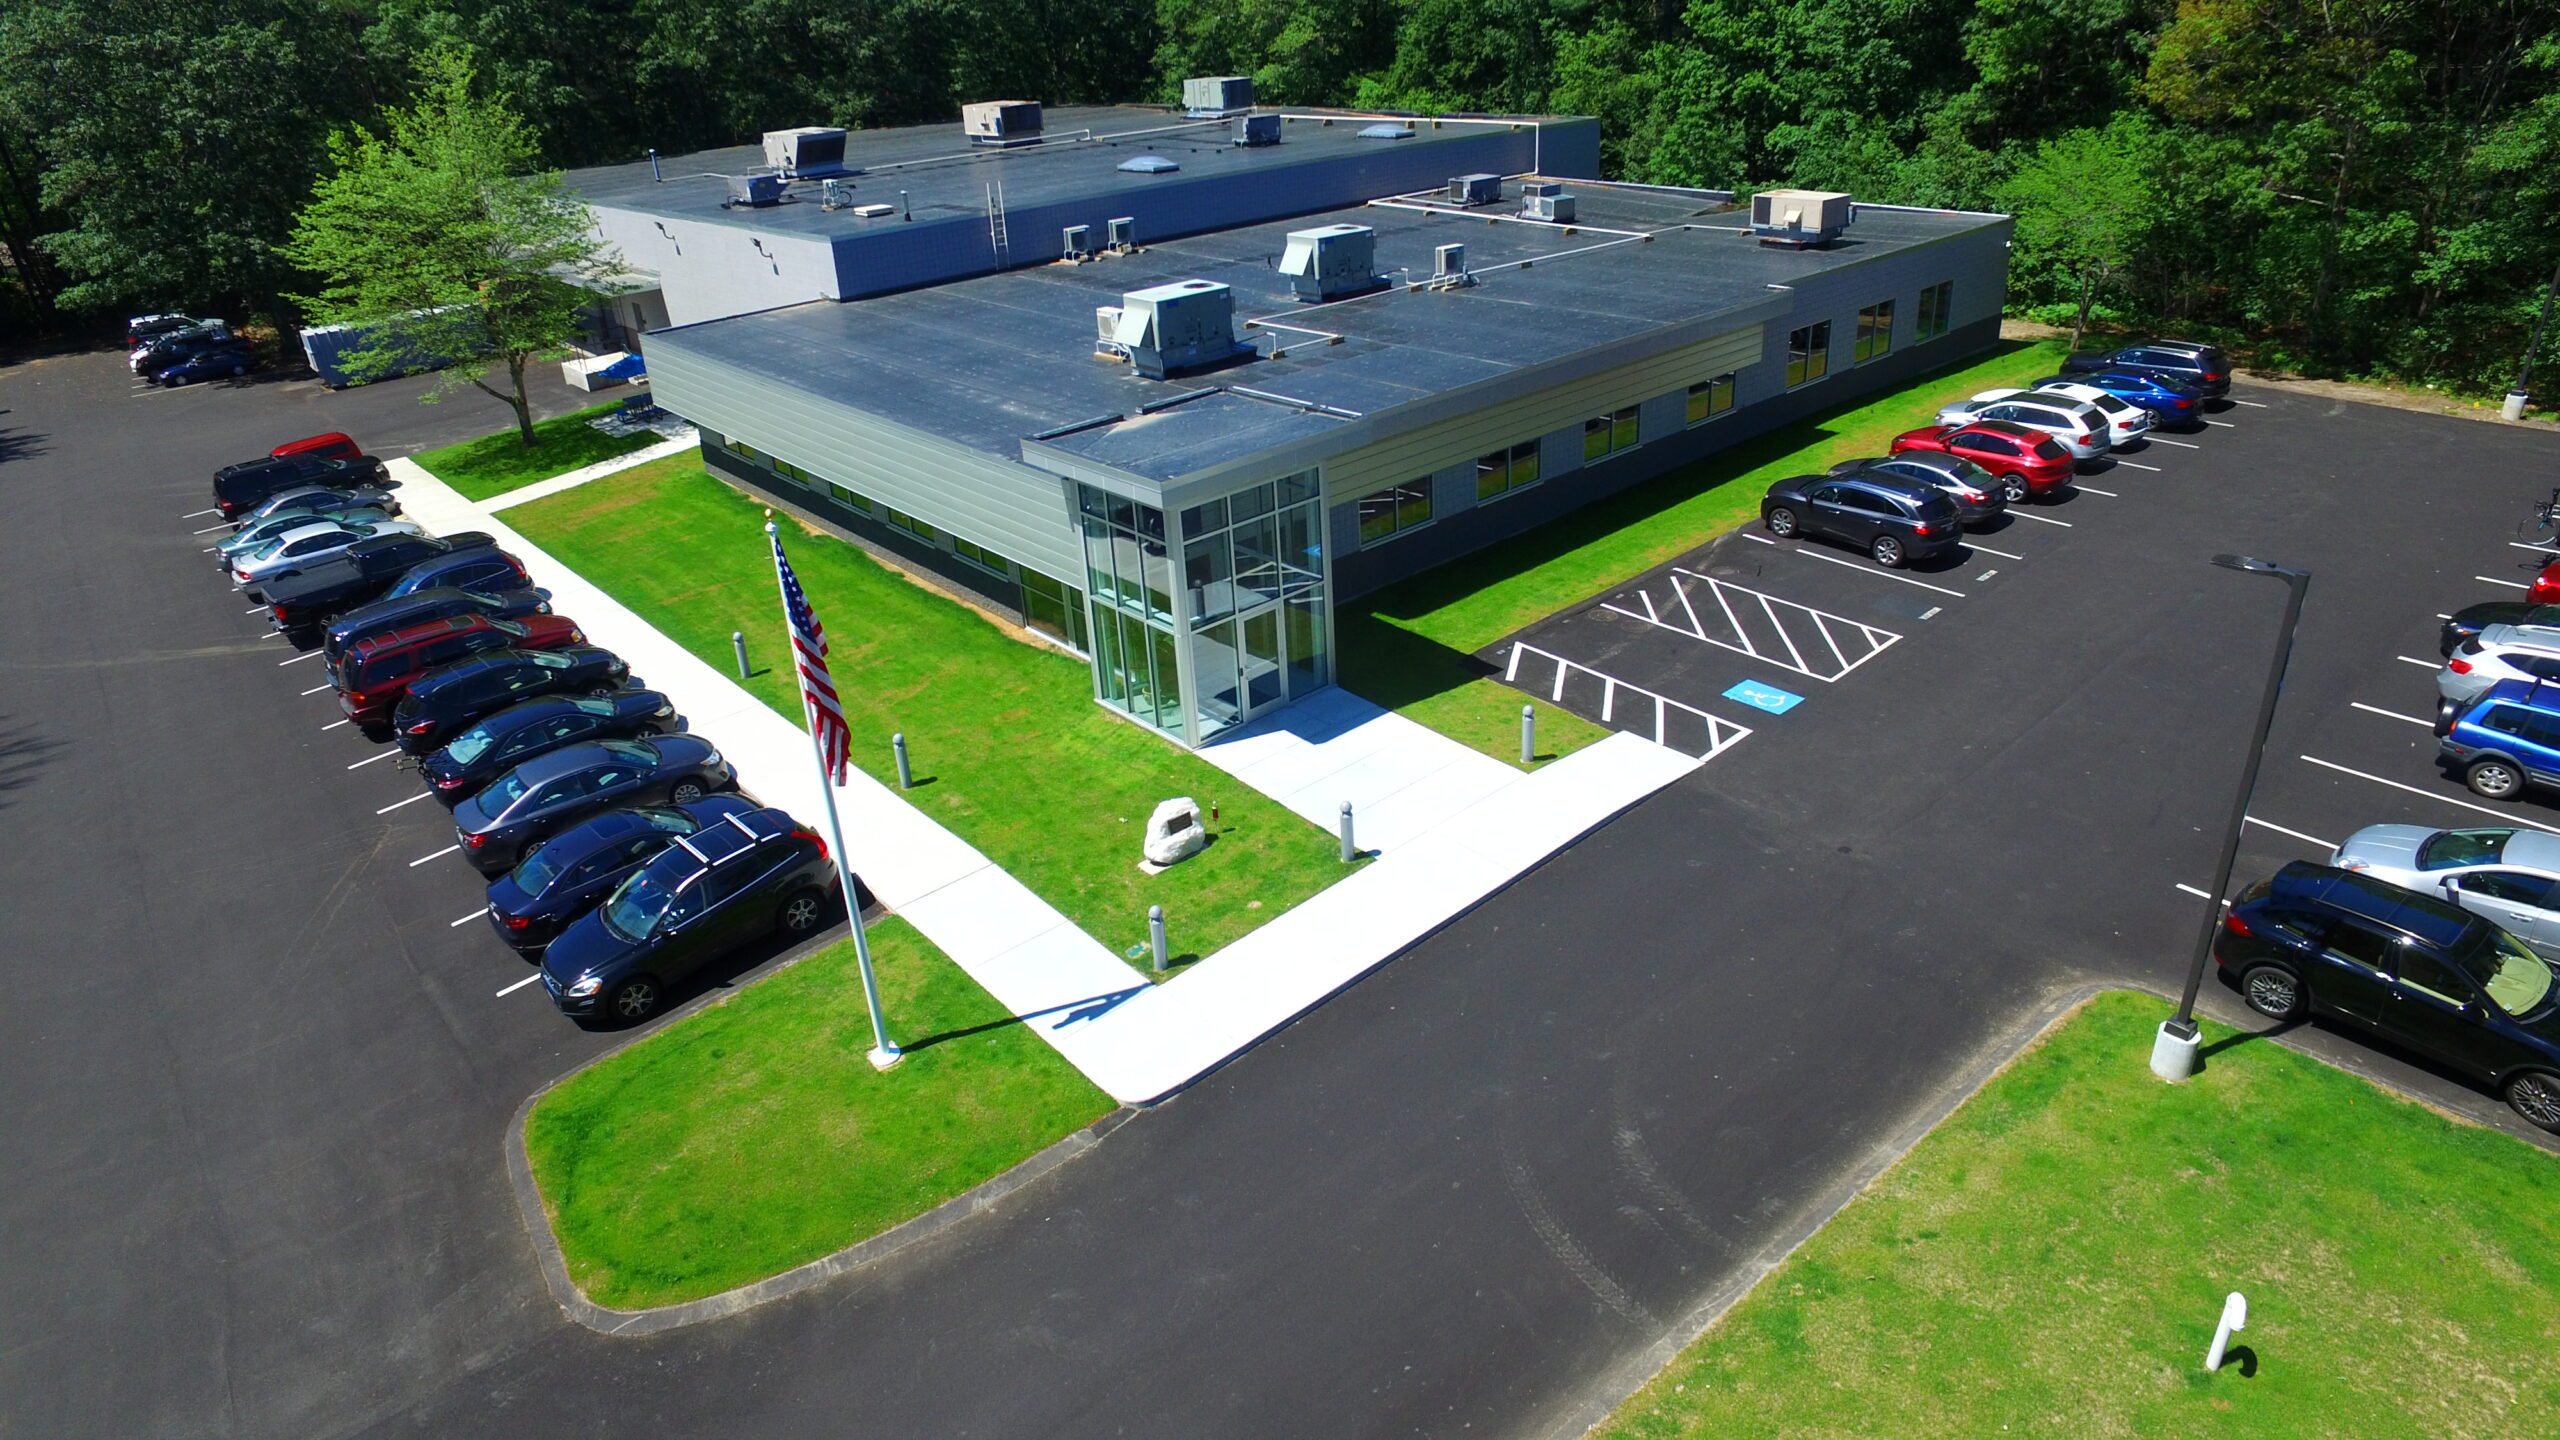 “Company headquarters aerial shot with cars in the parking lot”